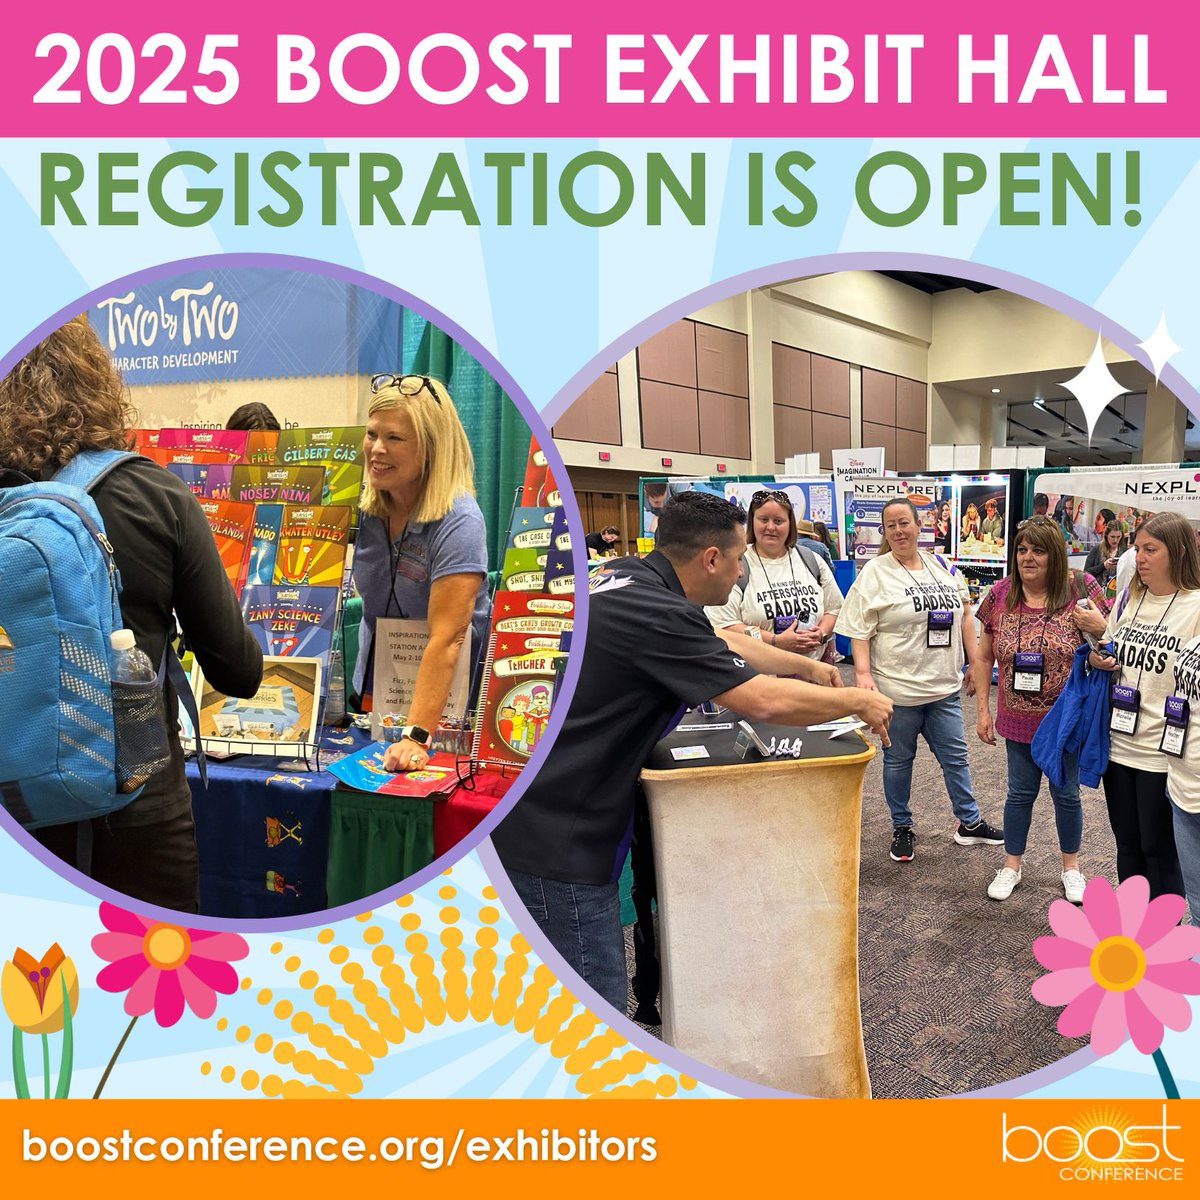 It's official - the BOOST Exhibit Hall is now open for the 2025 #boostconference! Come share your products & services with over 3,500 educators in Palm Springs on April 29-May 2. Grab your booth today, we anticipate that the hall will sell out quickly! boostconference.org/exhibitors